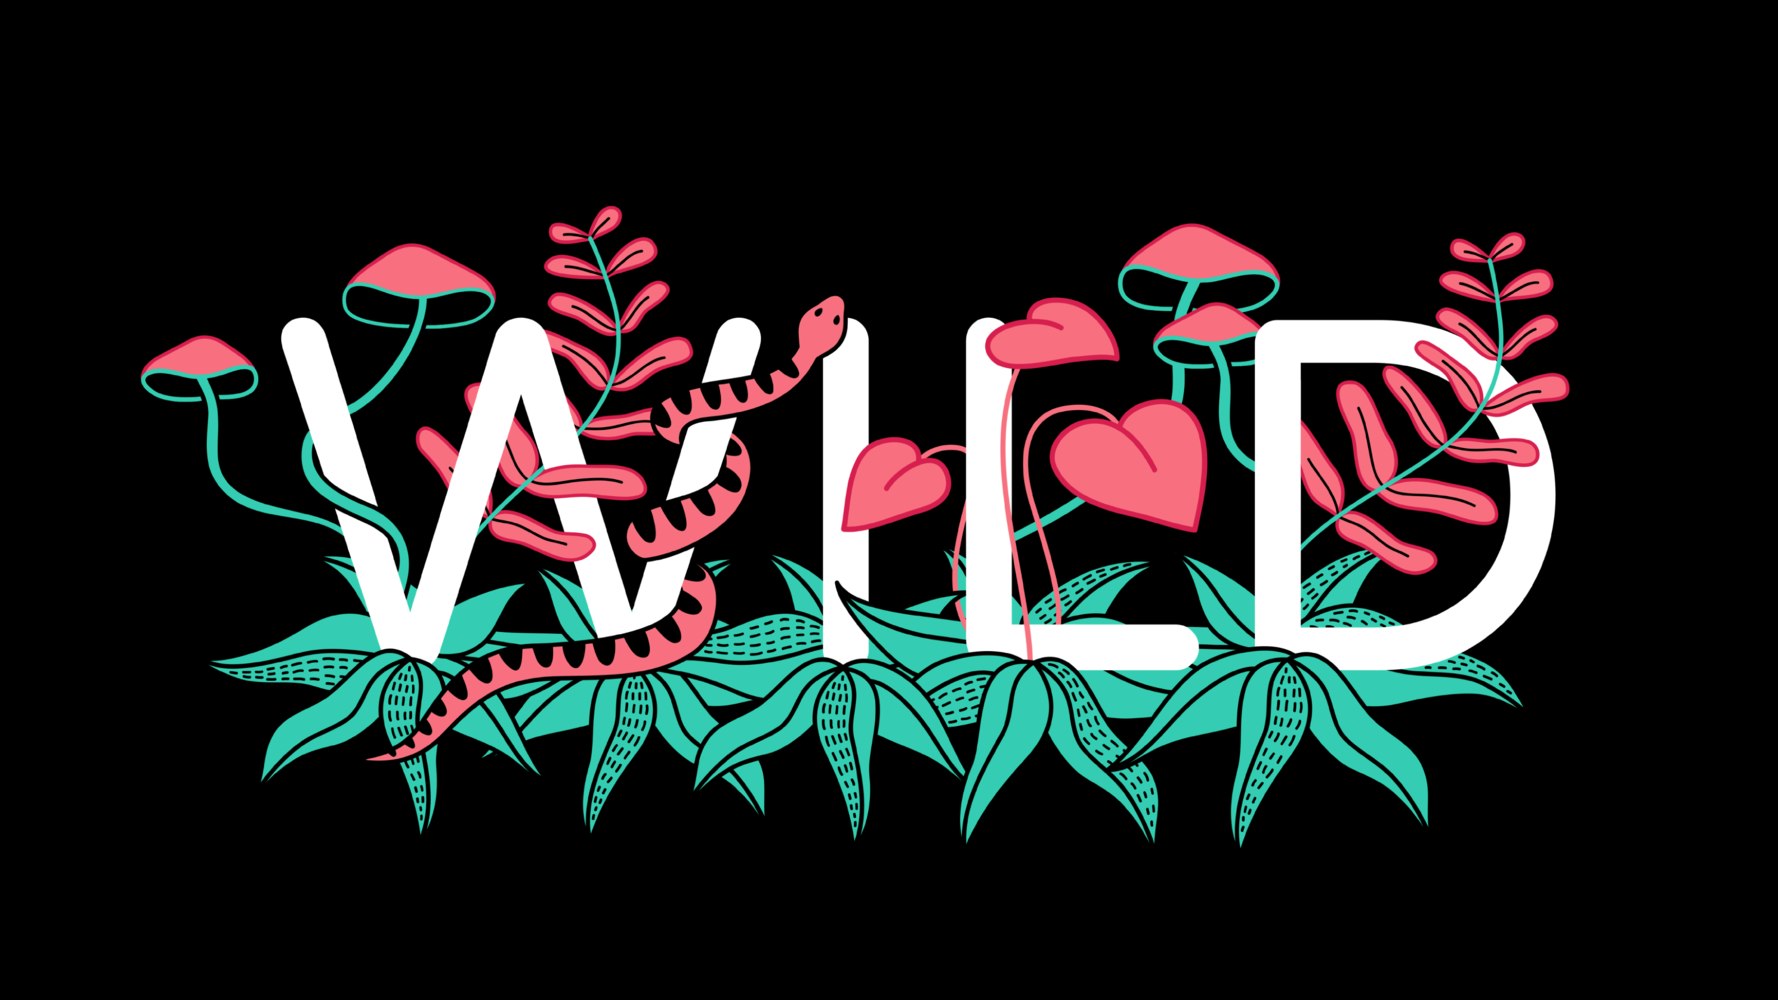 The word Wild with a snake and bright plants winding through the letters